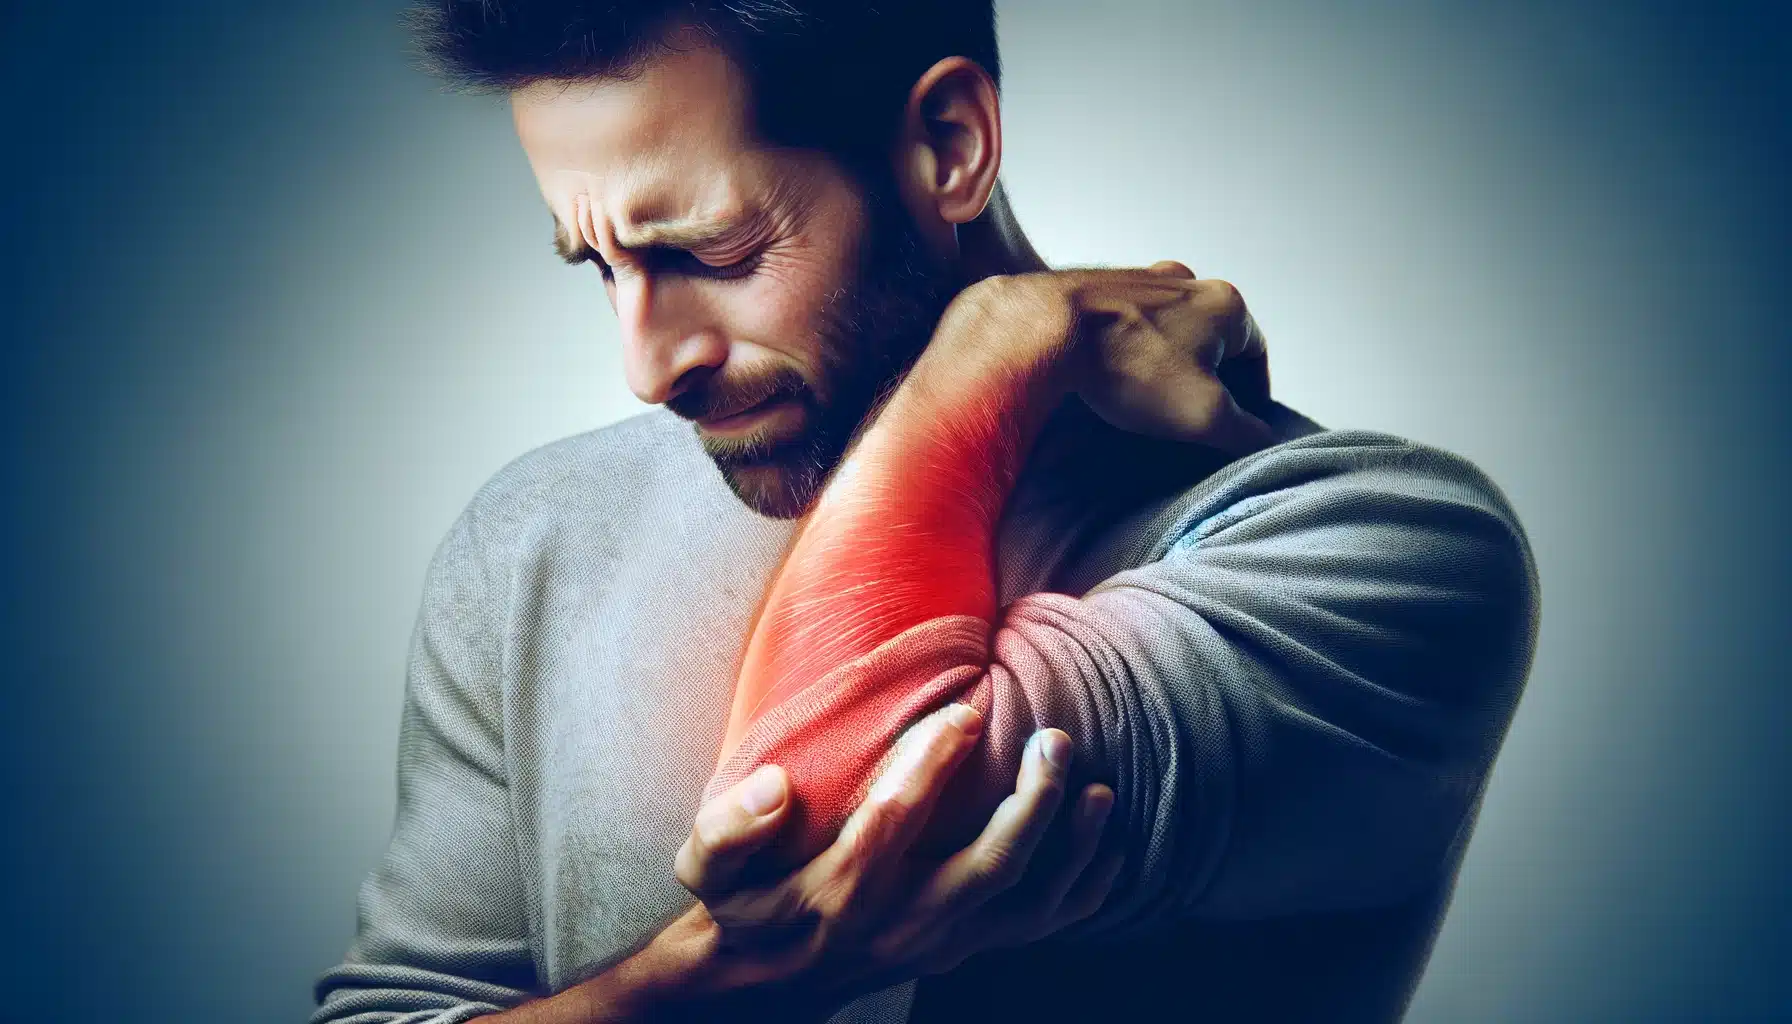 Tennis Elbow Explained: Frustrating Pain